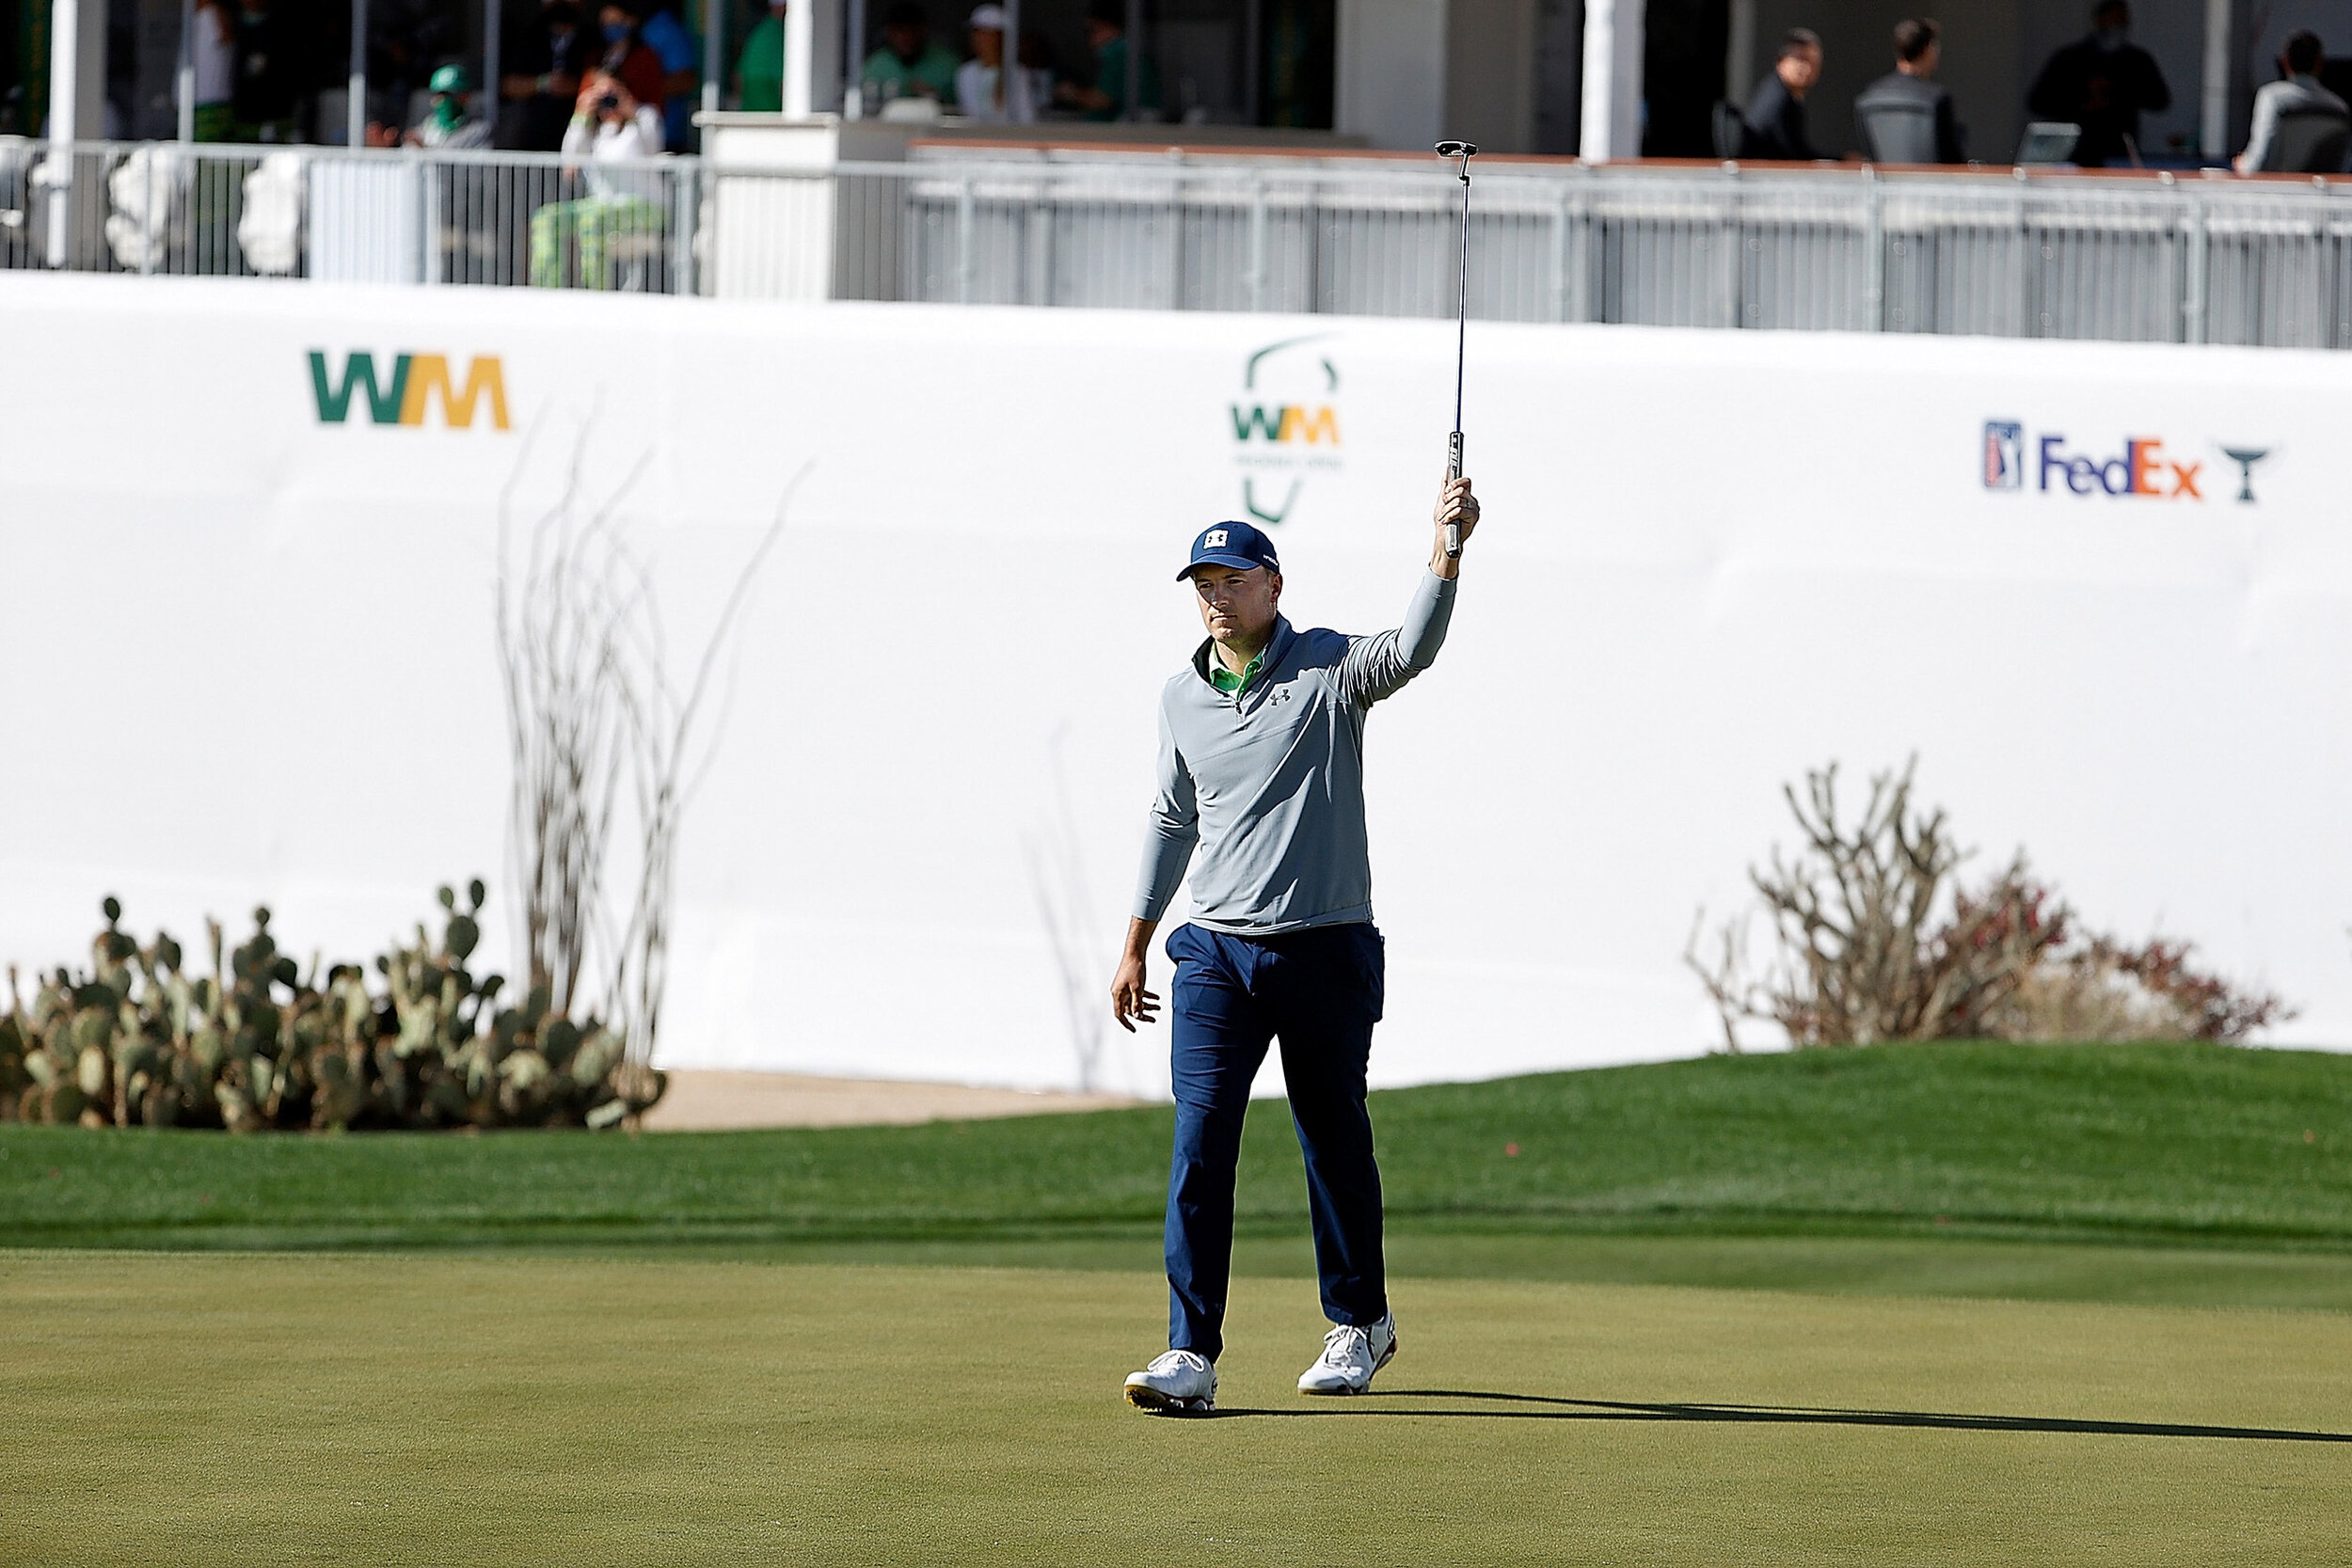  SCOTTSDALE, ARIZONA - FEBRUARY 06: Jordan Spieth of the United States reacts to a birdie on the 16th hole during the third round of the Waste Management Phoenix Open at TPC Scottsdale on February 06, 2021 in Scottsdale, Arizona. (Photo by Christian 